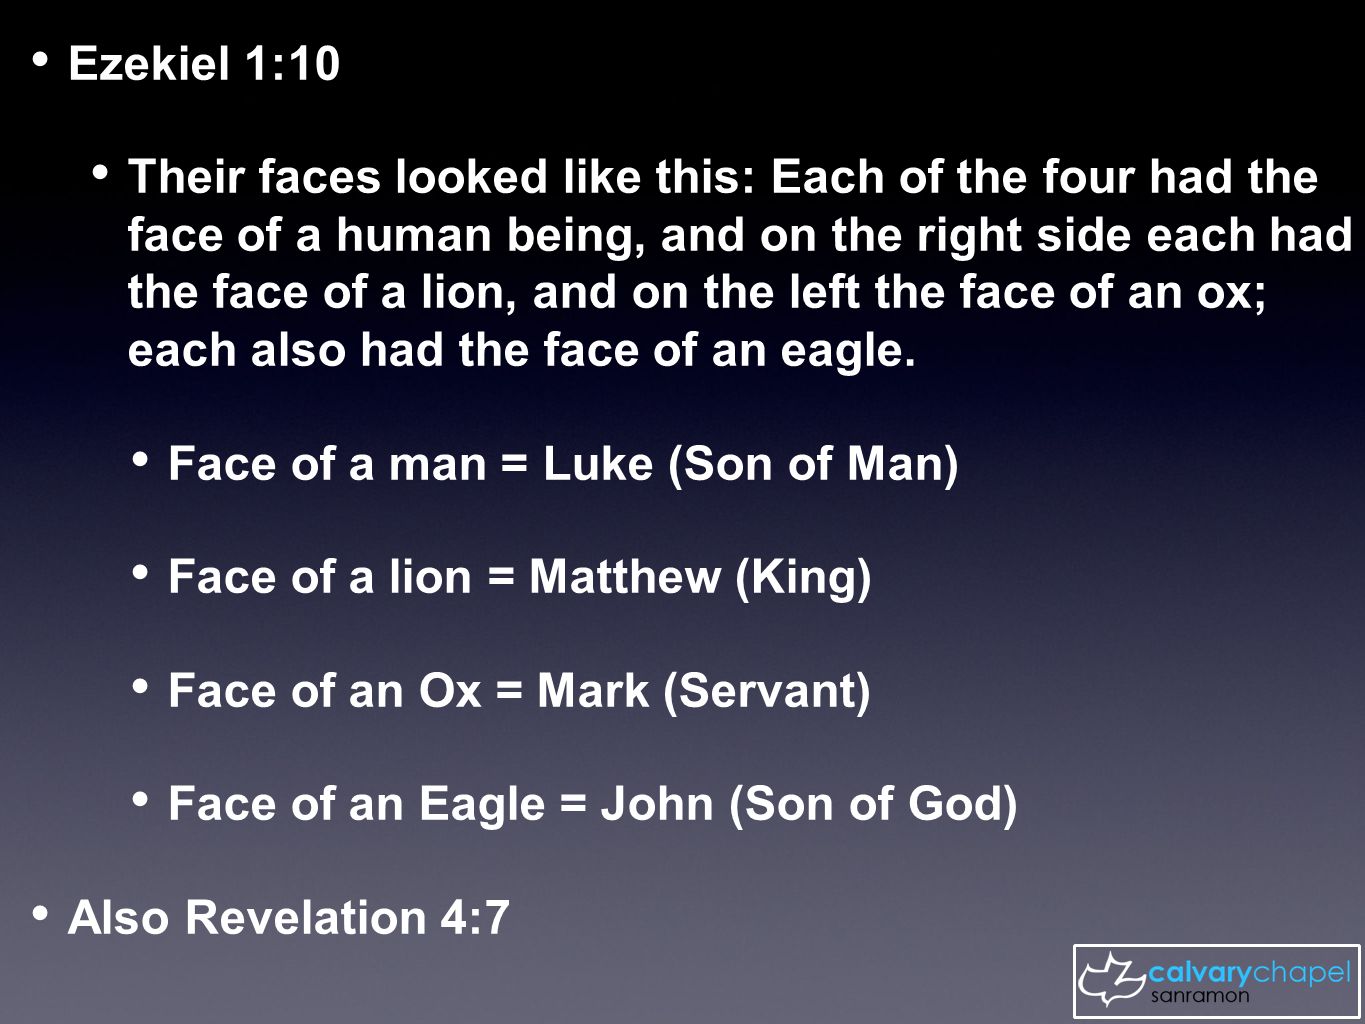 Ezekiel 1:10 Their faces looked like this: Each of the four had the face of a human being, and on the right side each had the face of a lion, and on the left the face of an ox; each also had the face of an eagle.